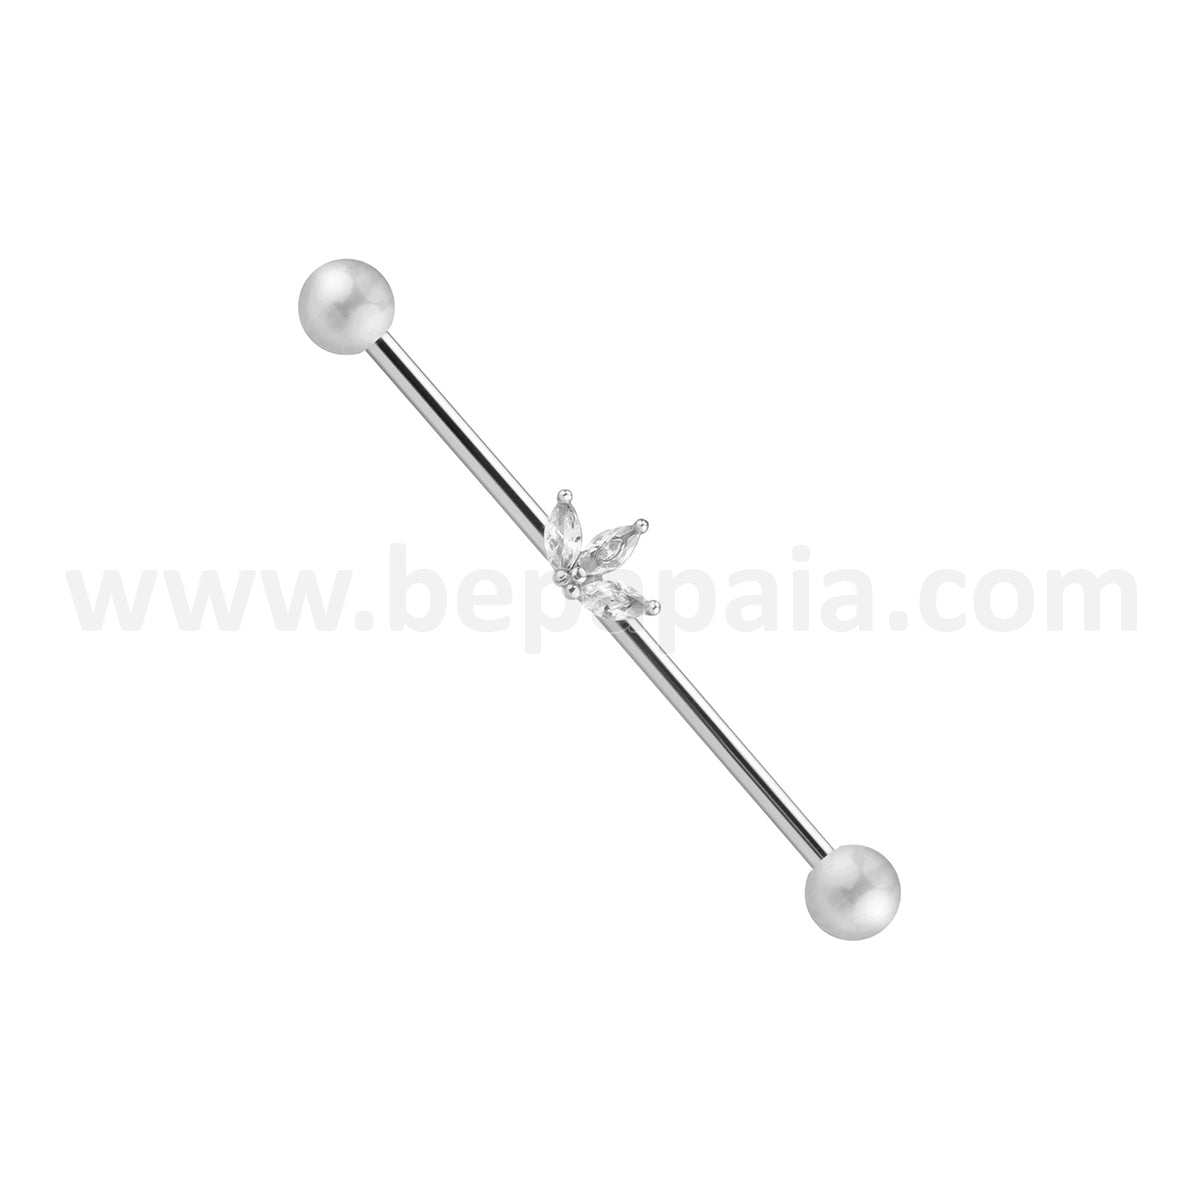 Piercing industrial con marquise